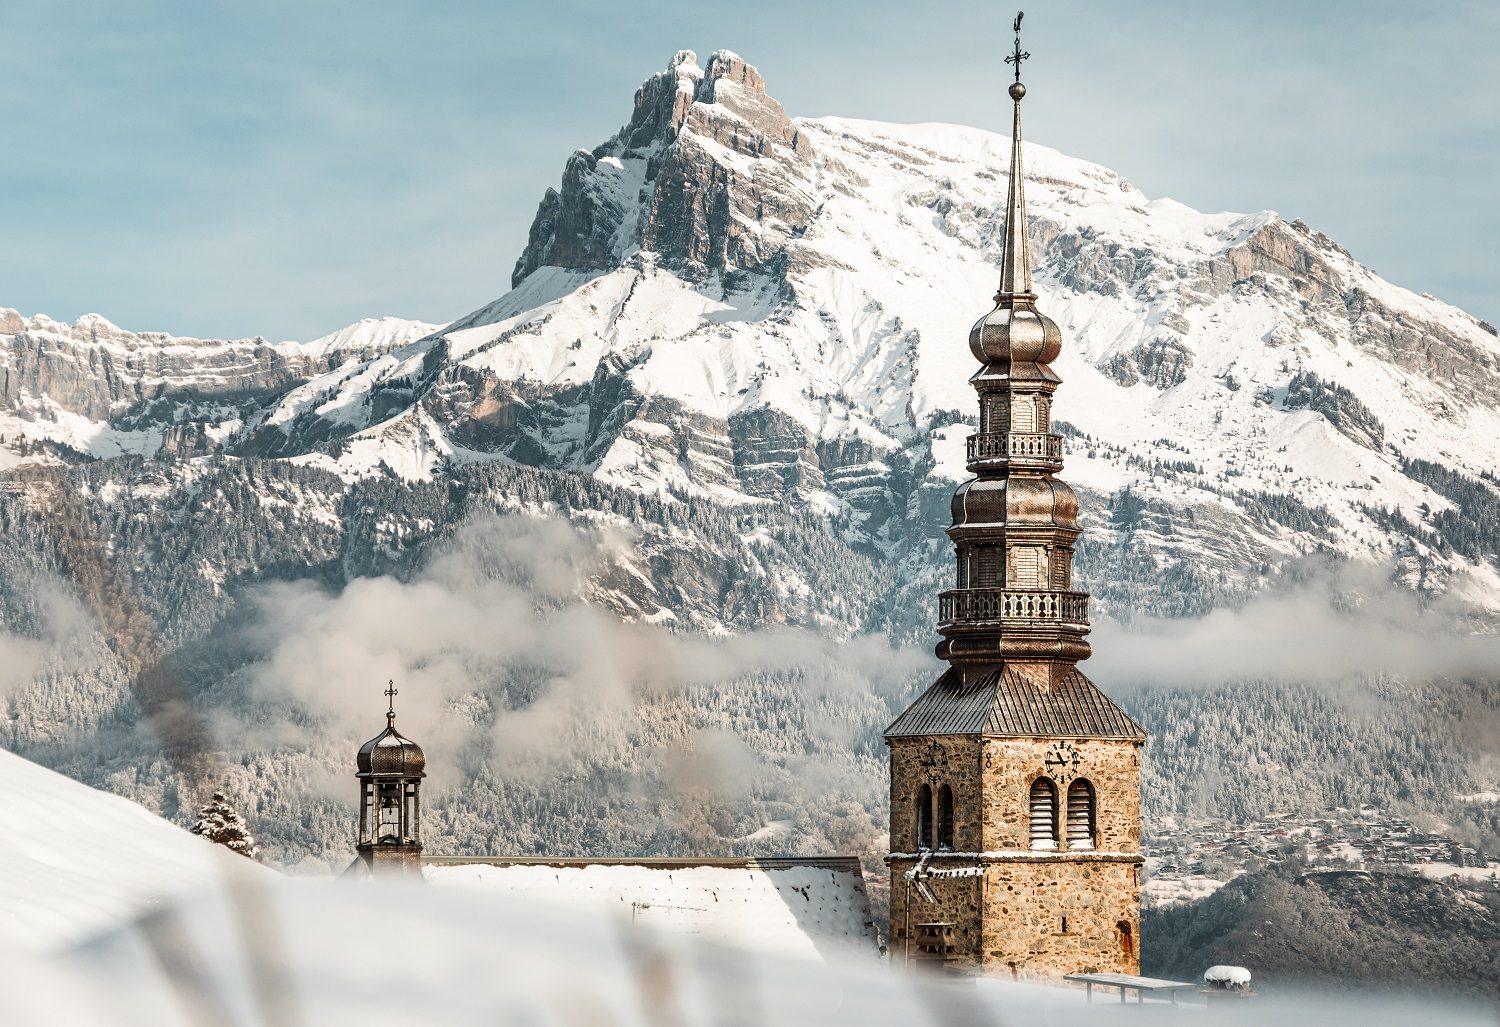 Bell tower of the Church of Combloux in a snowy landscape